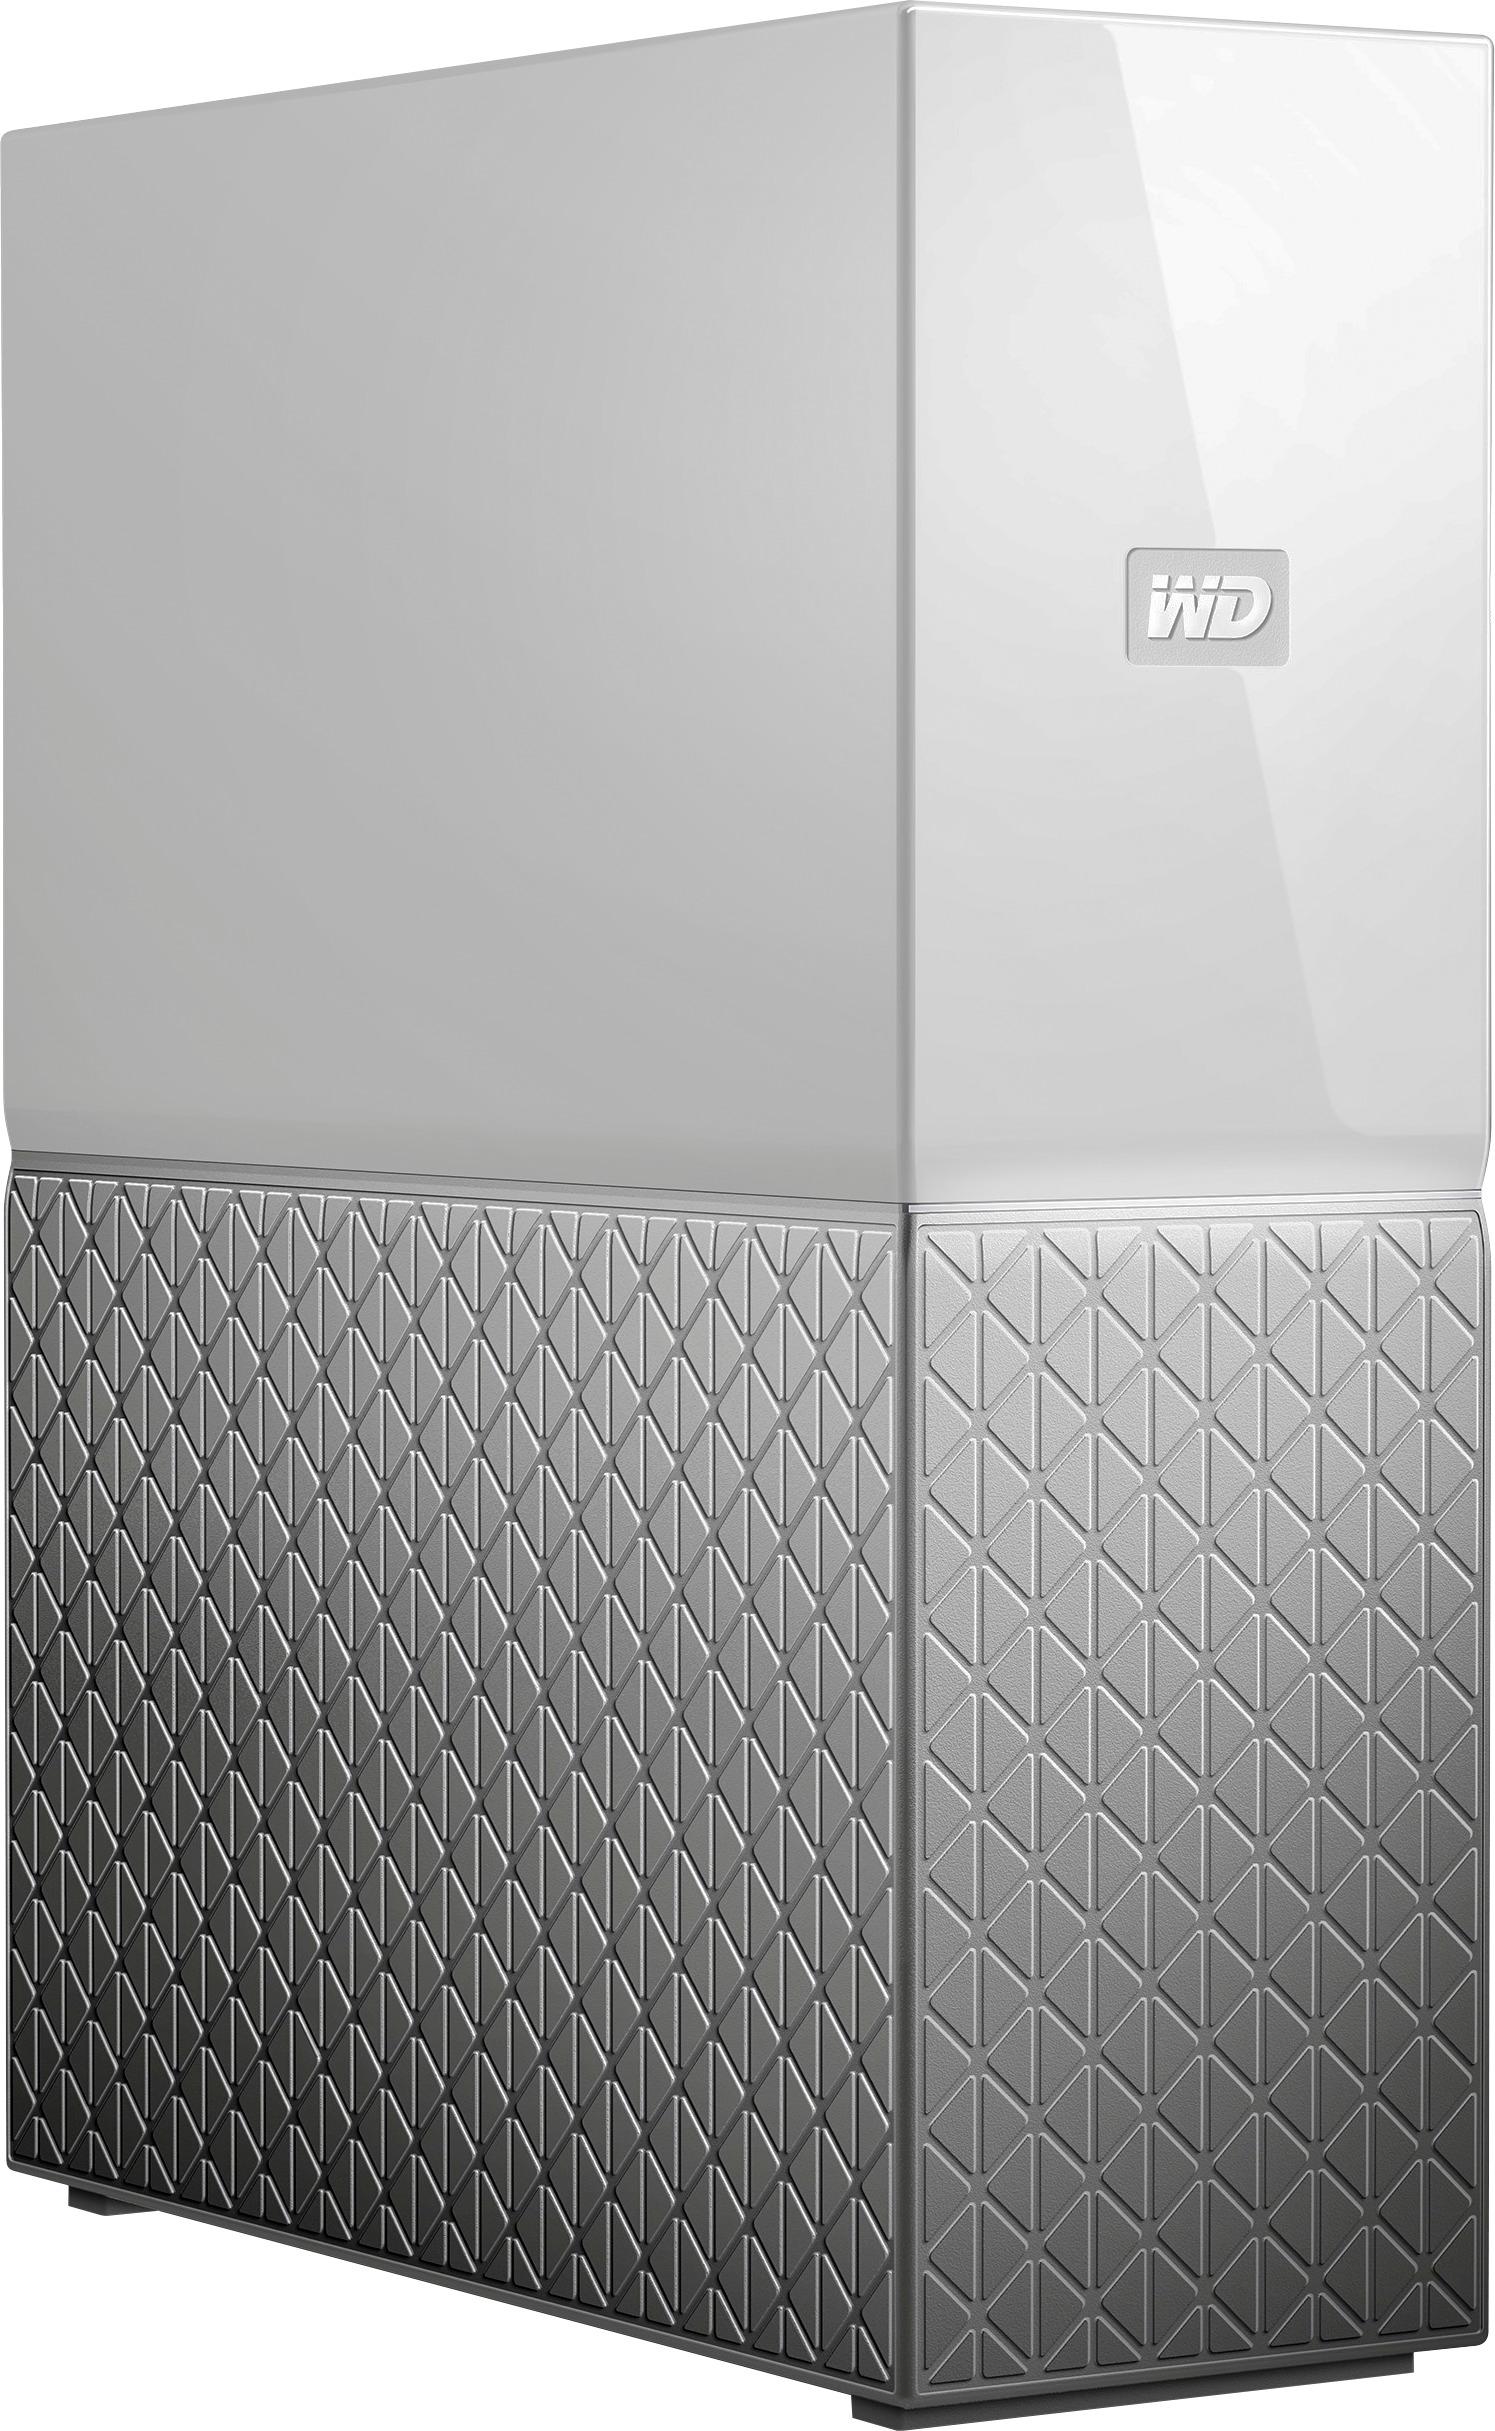 WD My Cloud Home 4TB Personal Cloud White WDBVXC0040HWT-NESN - Best Buy